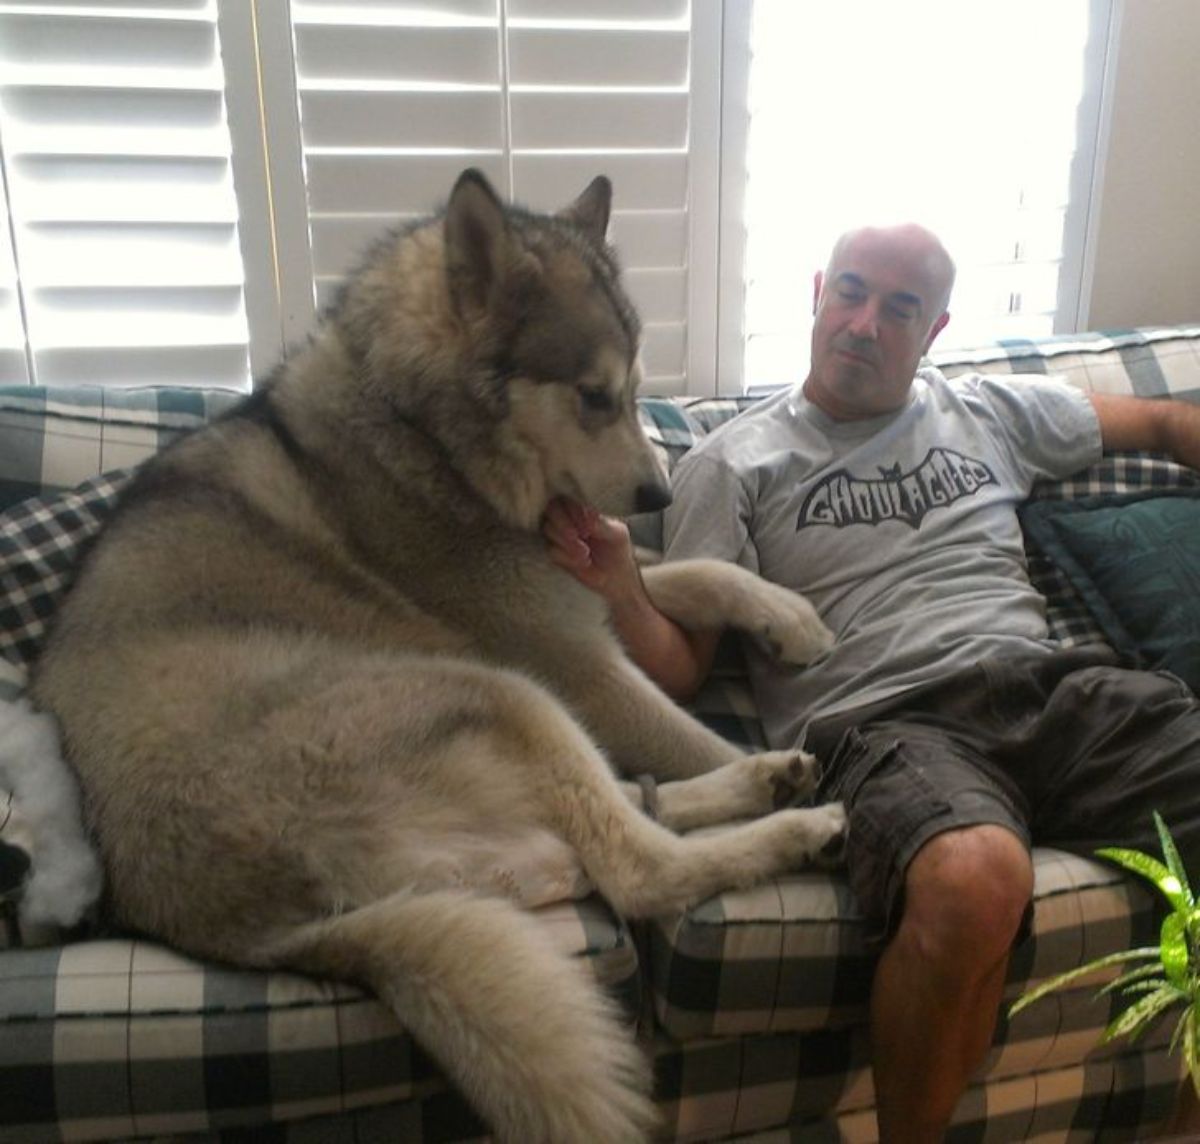 black and white husky sitting on a plaid sofa next to a man giving the dog chin scritches